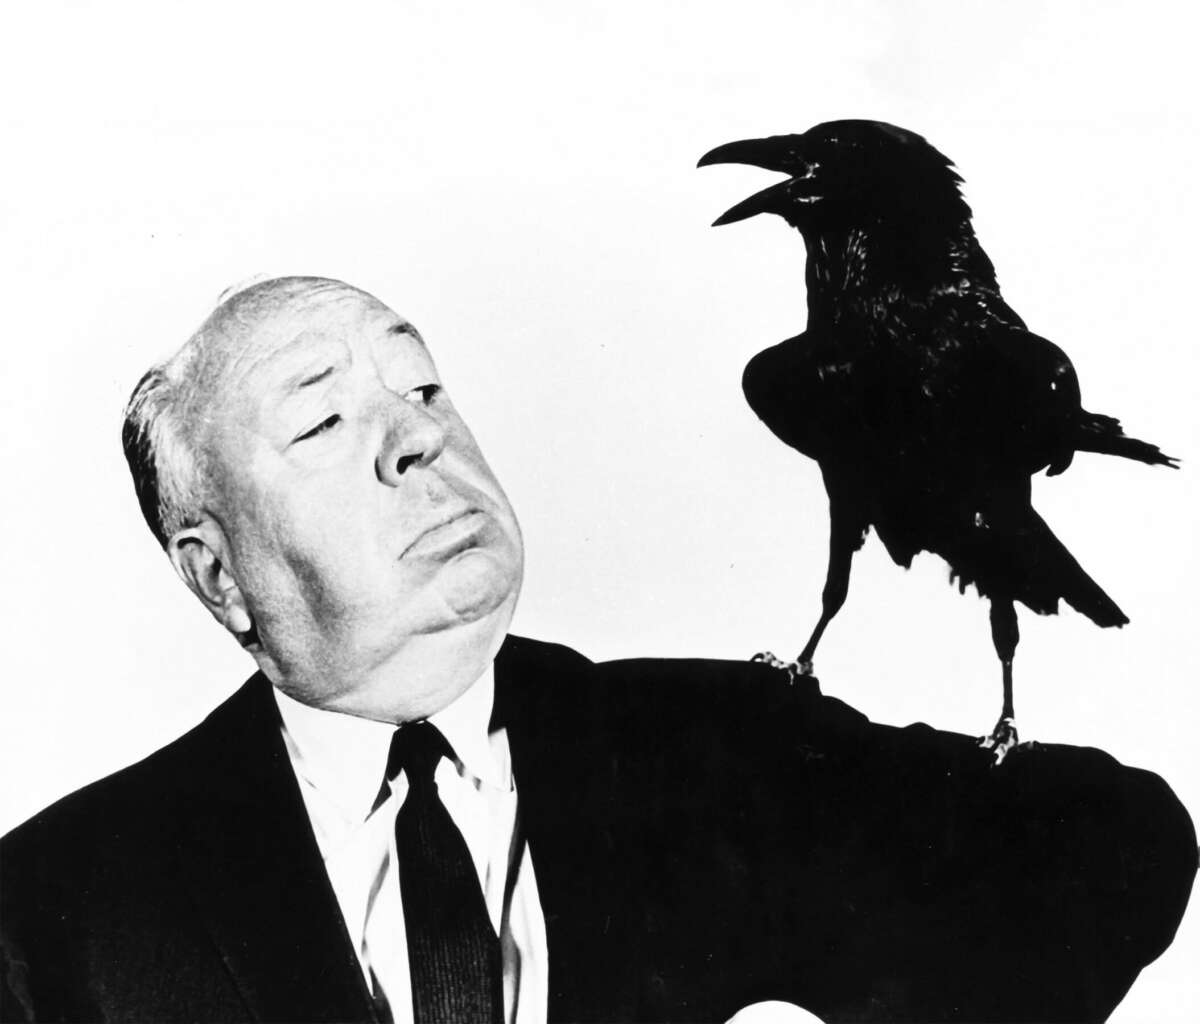 Black and white image of man with a crow on his shoulder